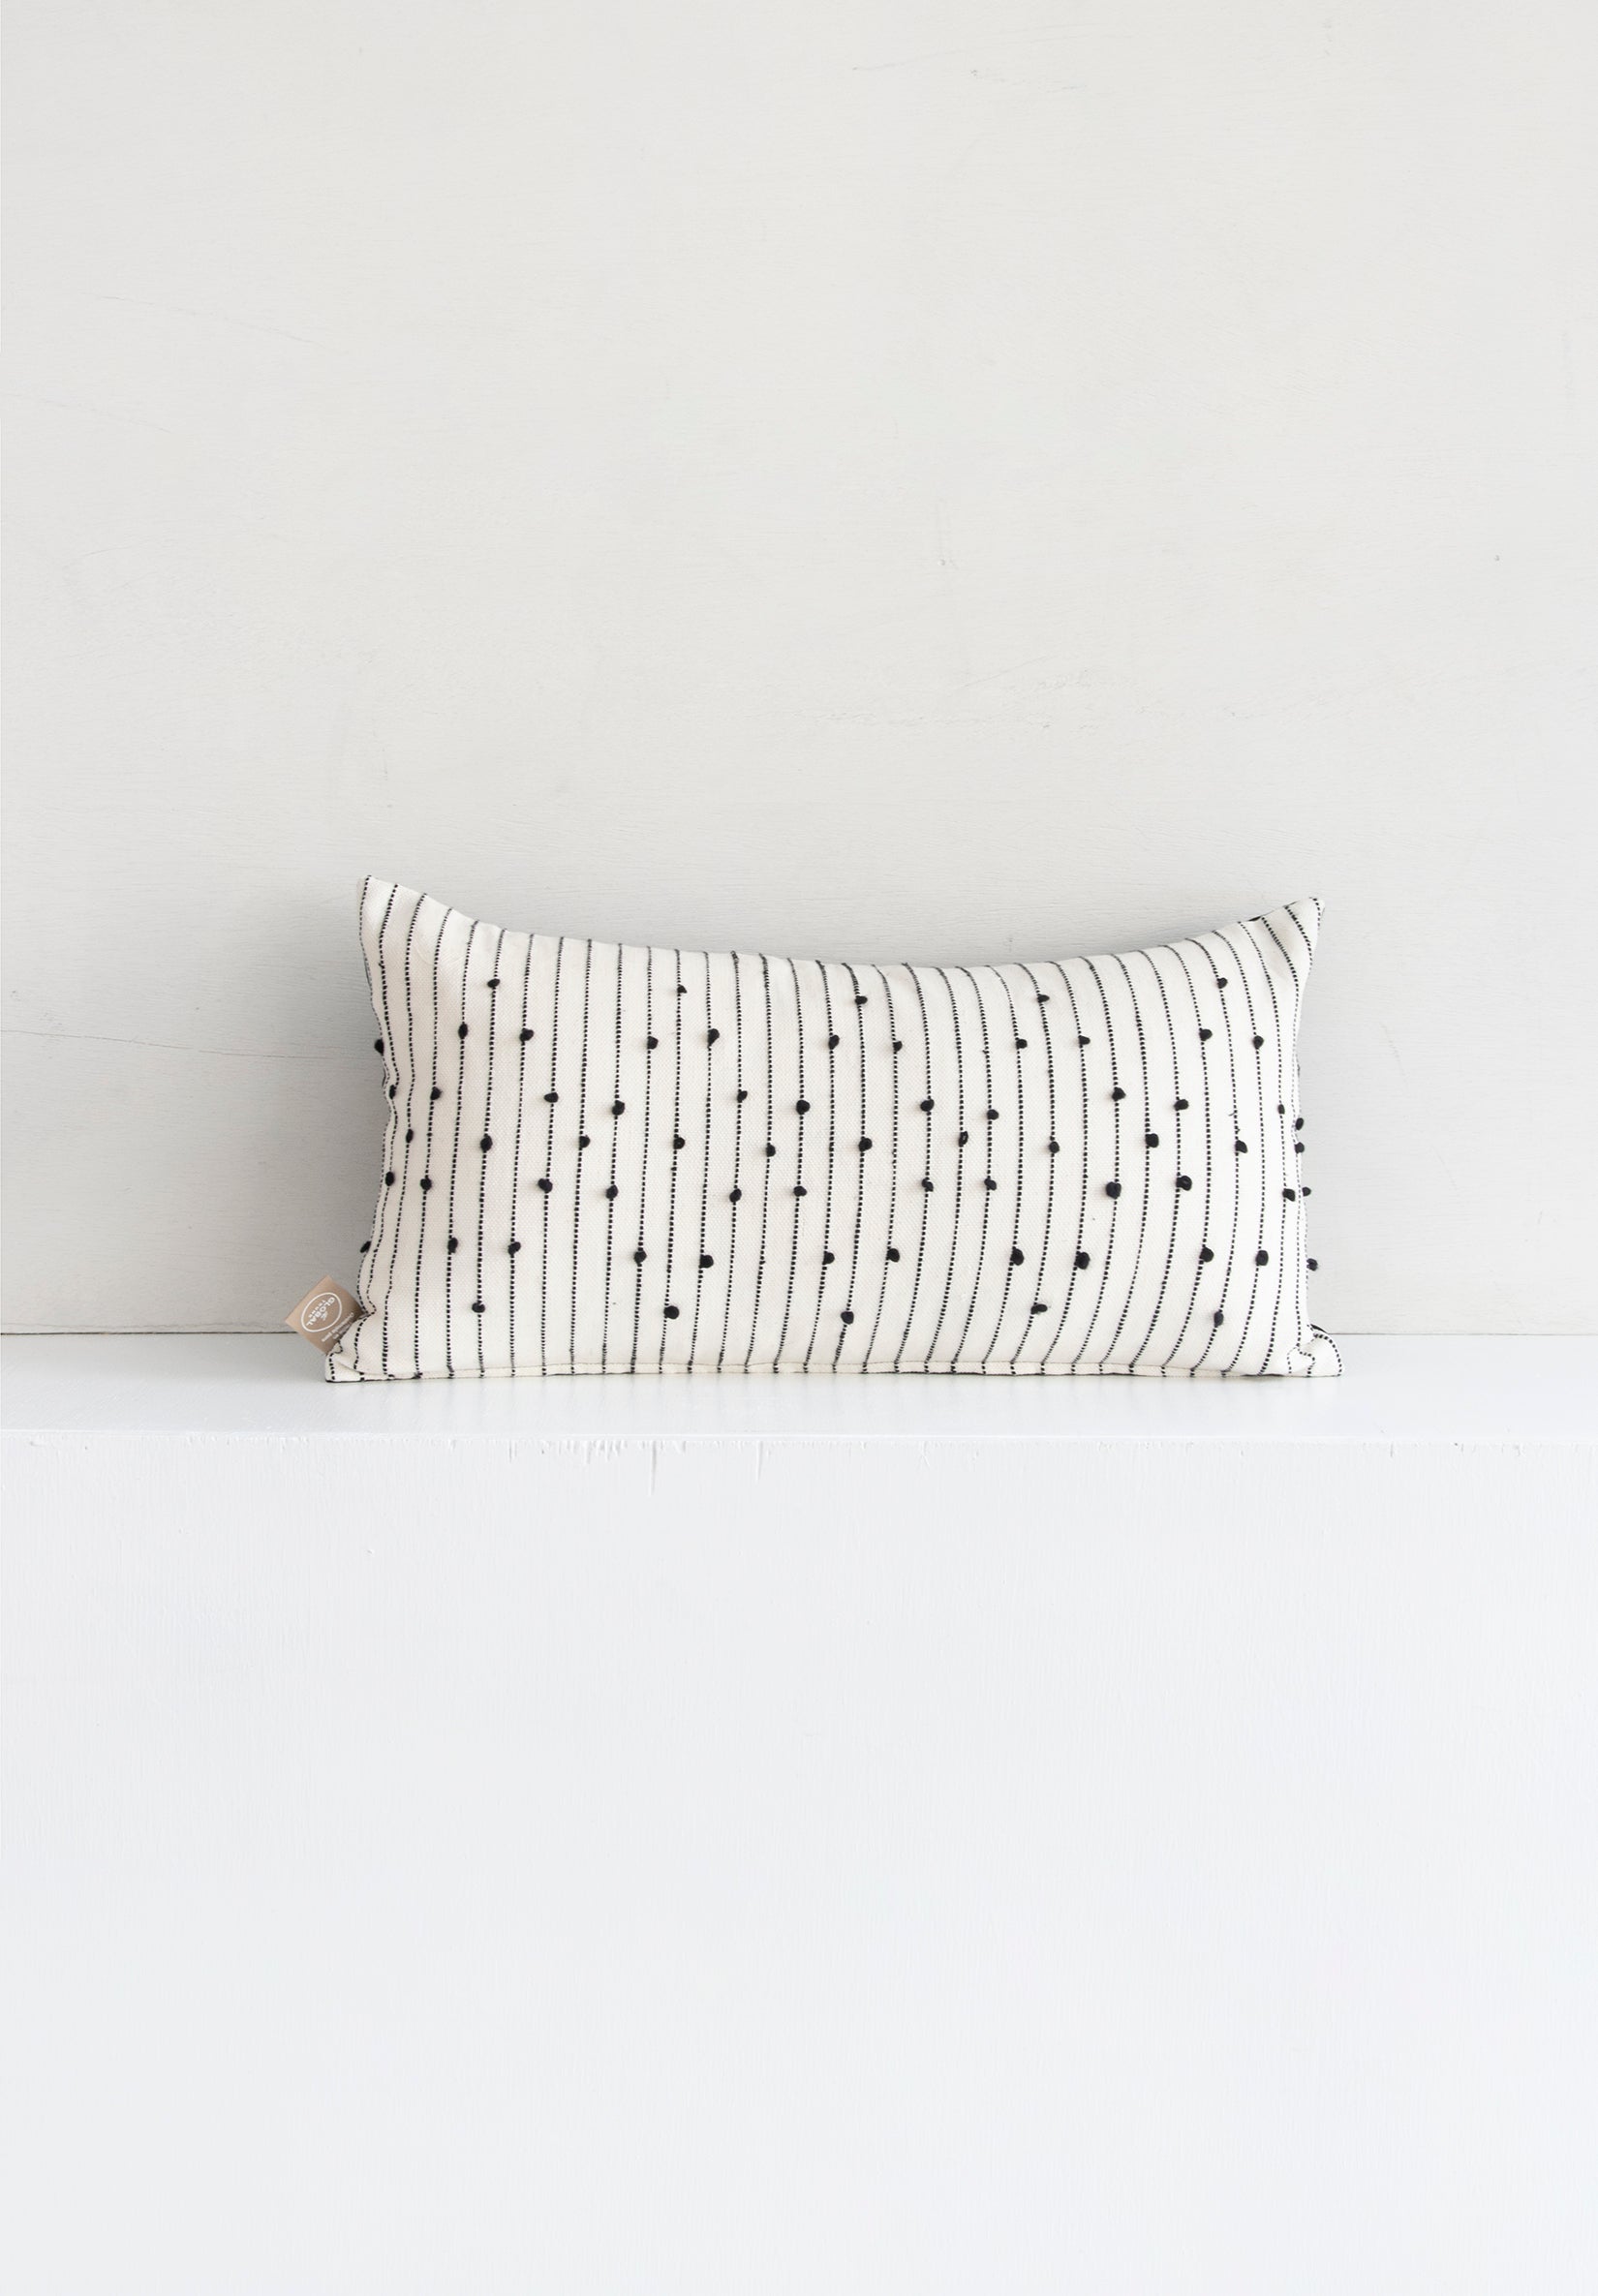 Lumbar white woven throw pillow with small black pom pom accents arranged in a repeating diamond pattern arranged along black lines stretching across the pillow.